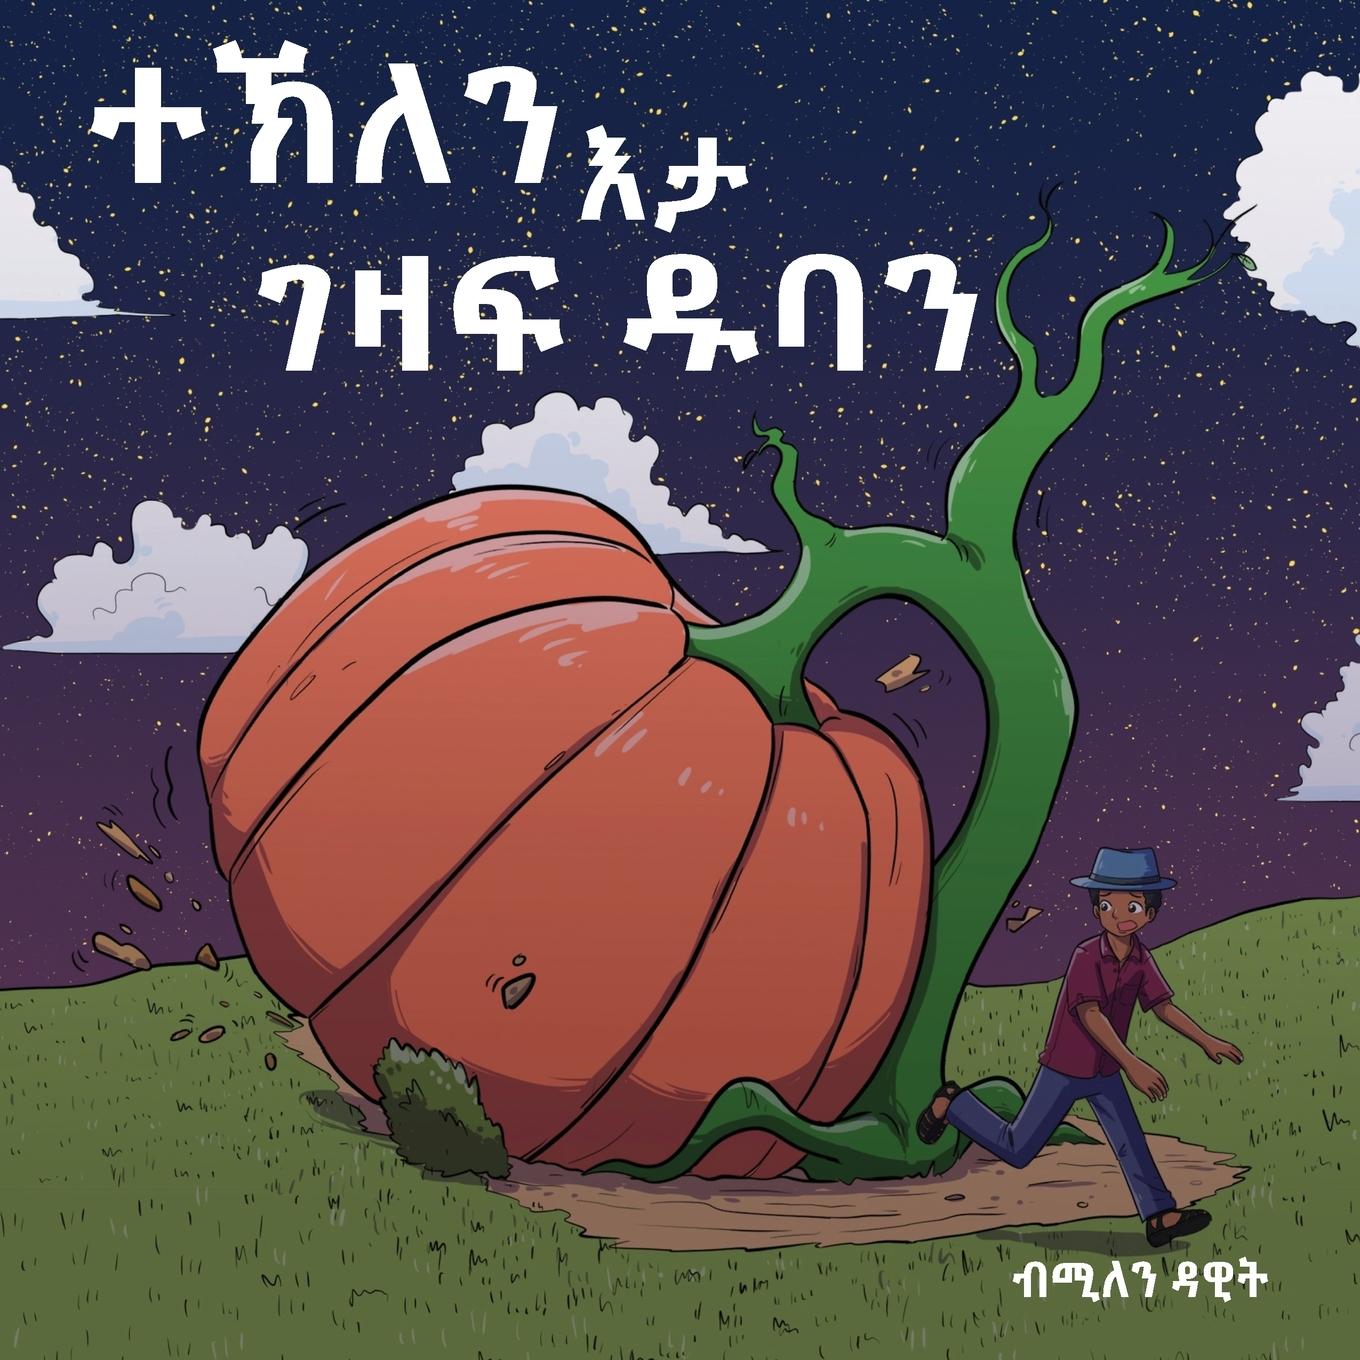 Book &#4720;&#4797;&#4616;&#4757; &#4773;&#4723; &#4872;&#4827;&#4941; &#4849;&#4707;&#4757; (Tekle and the Giant Pumpkin): &#4672;&#4851;&#4635;&#4845; &# 